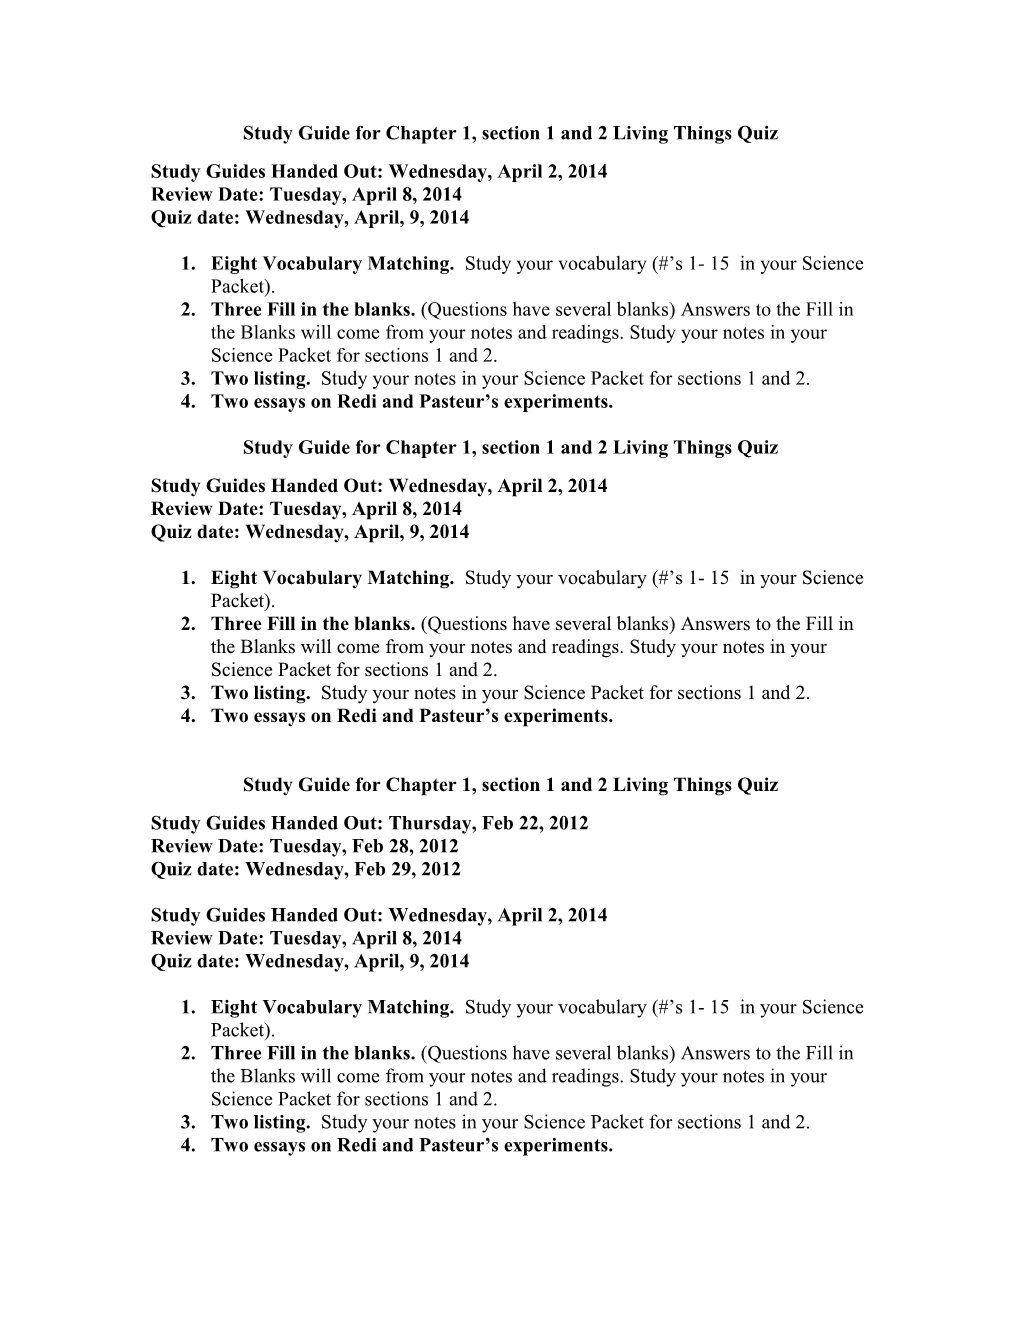 Study Guide for Chapter 1, Section 1 and 2 Living Things Quiz